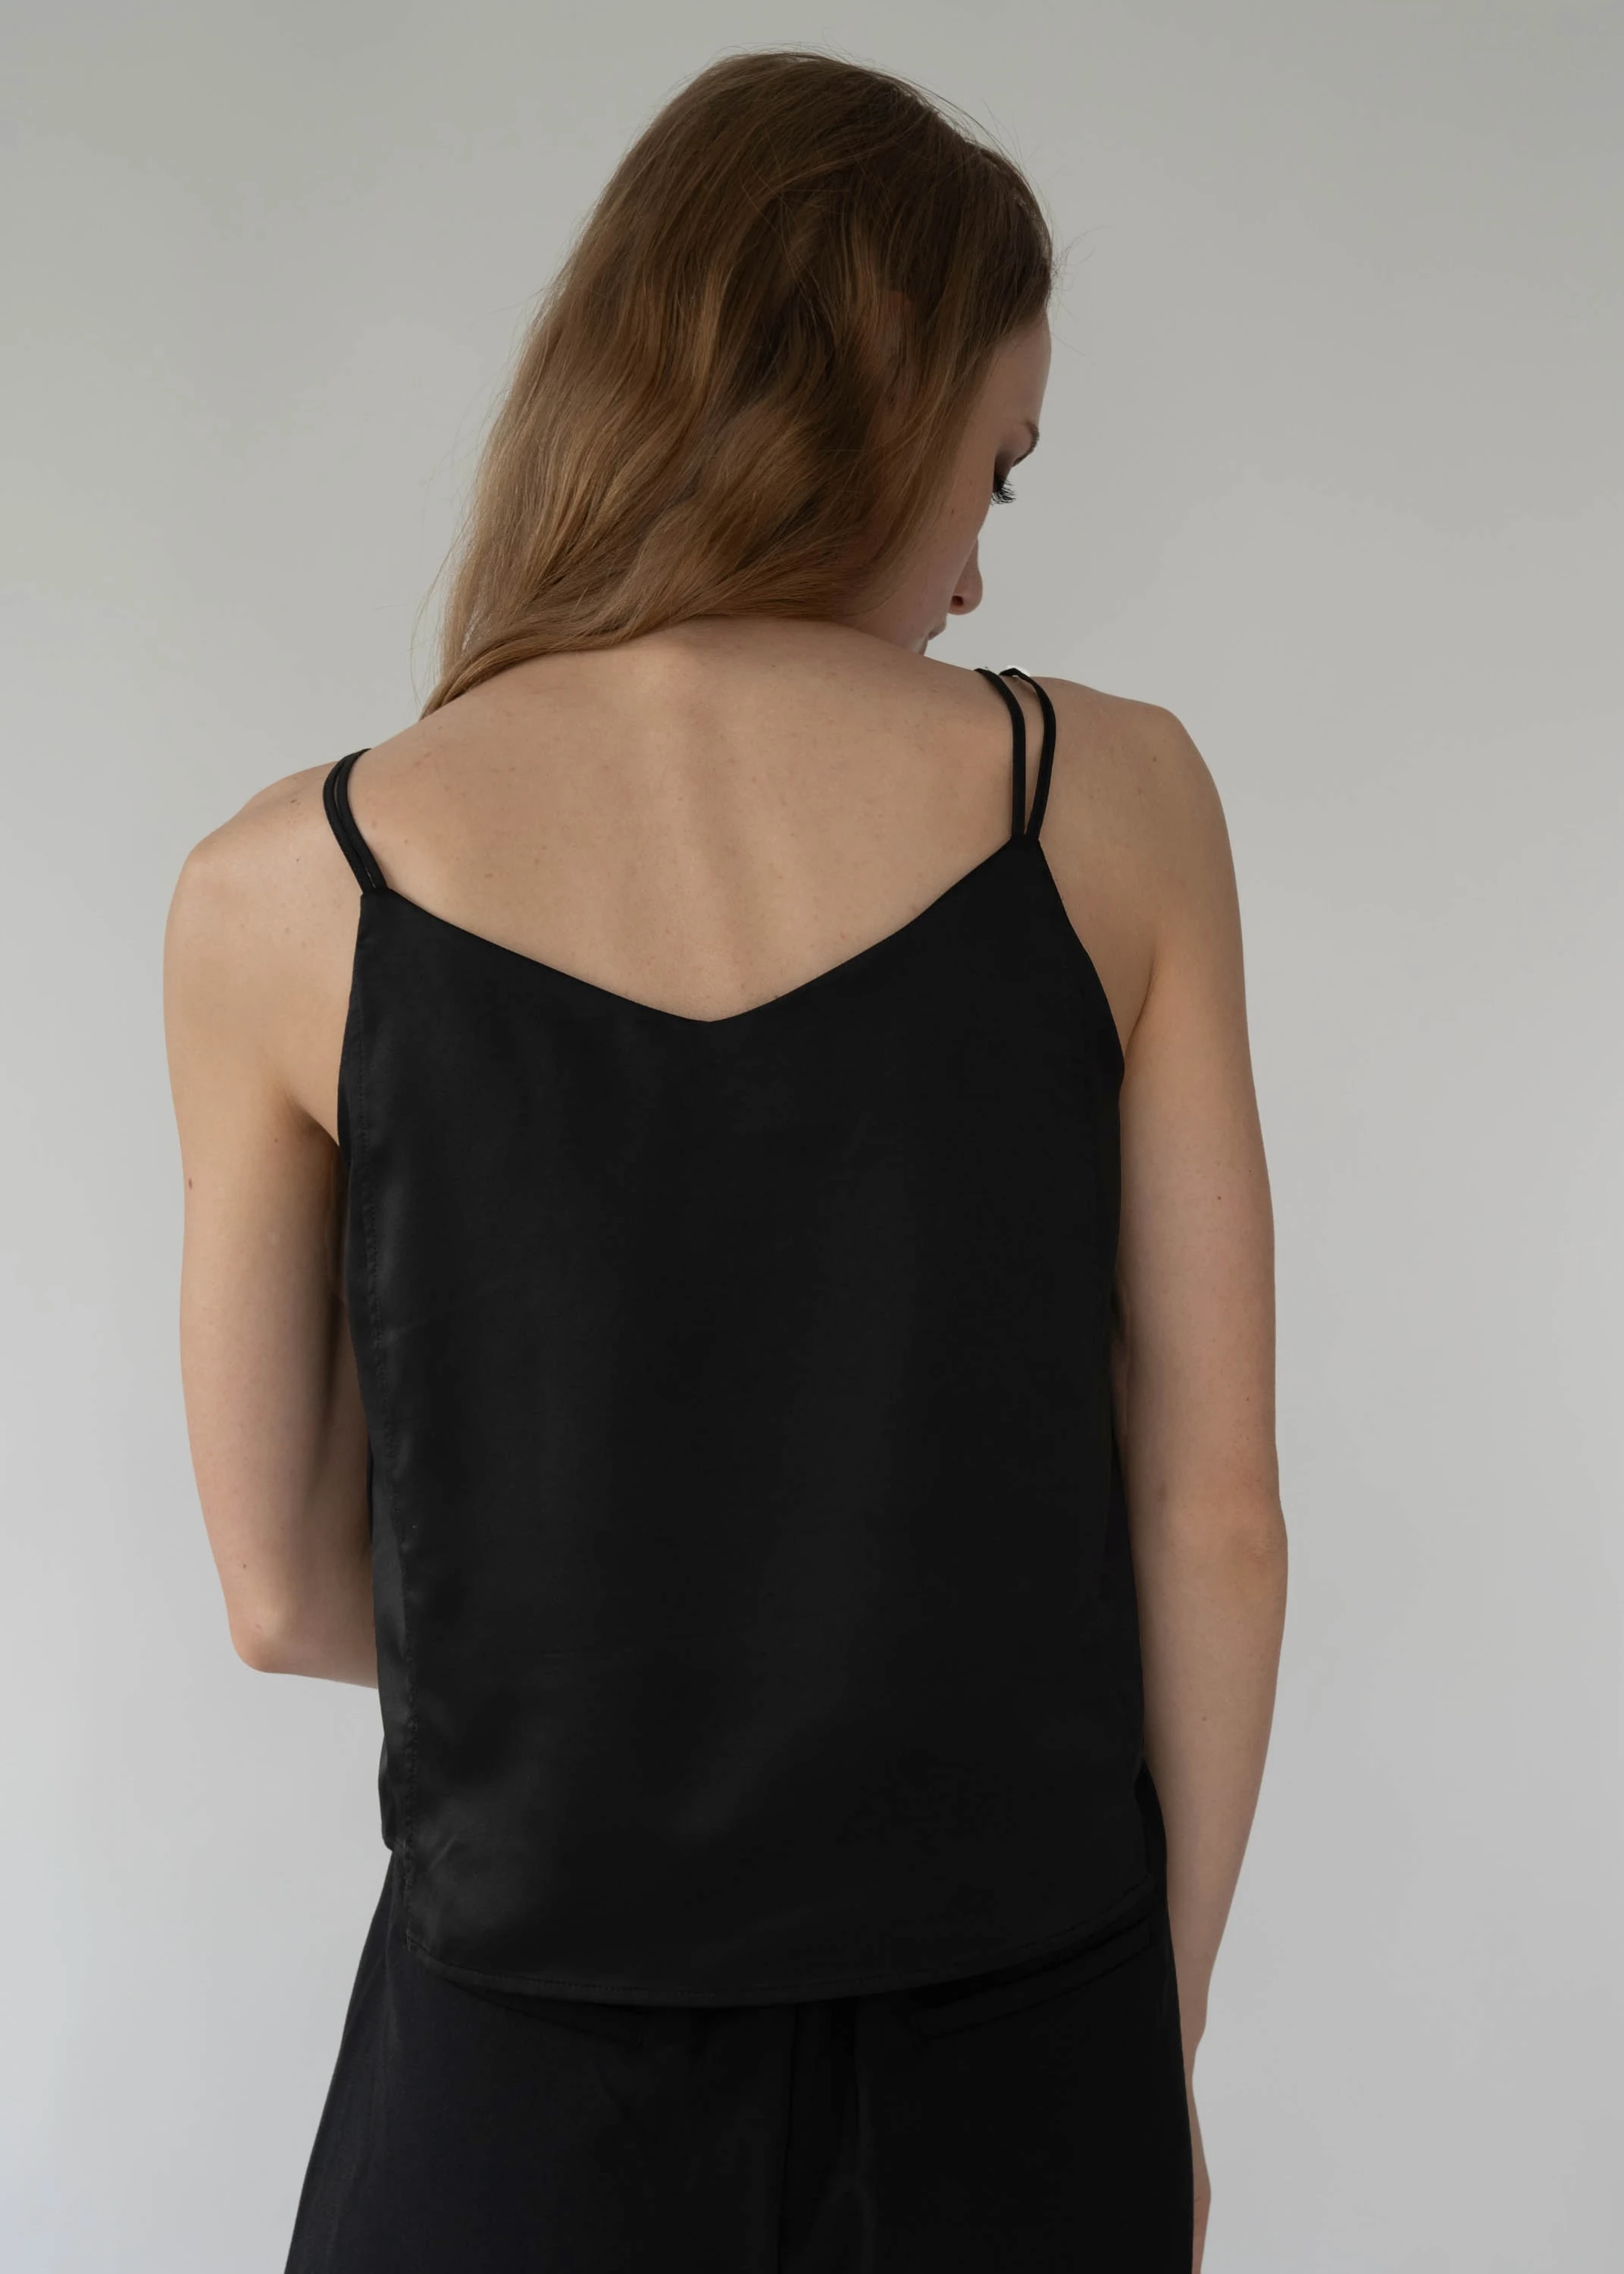 Hammered Satin Top Camisole Shiny